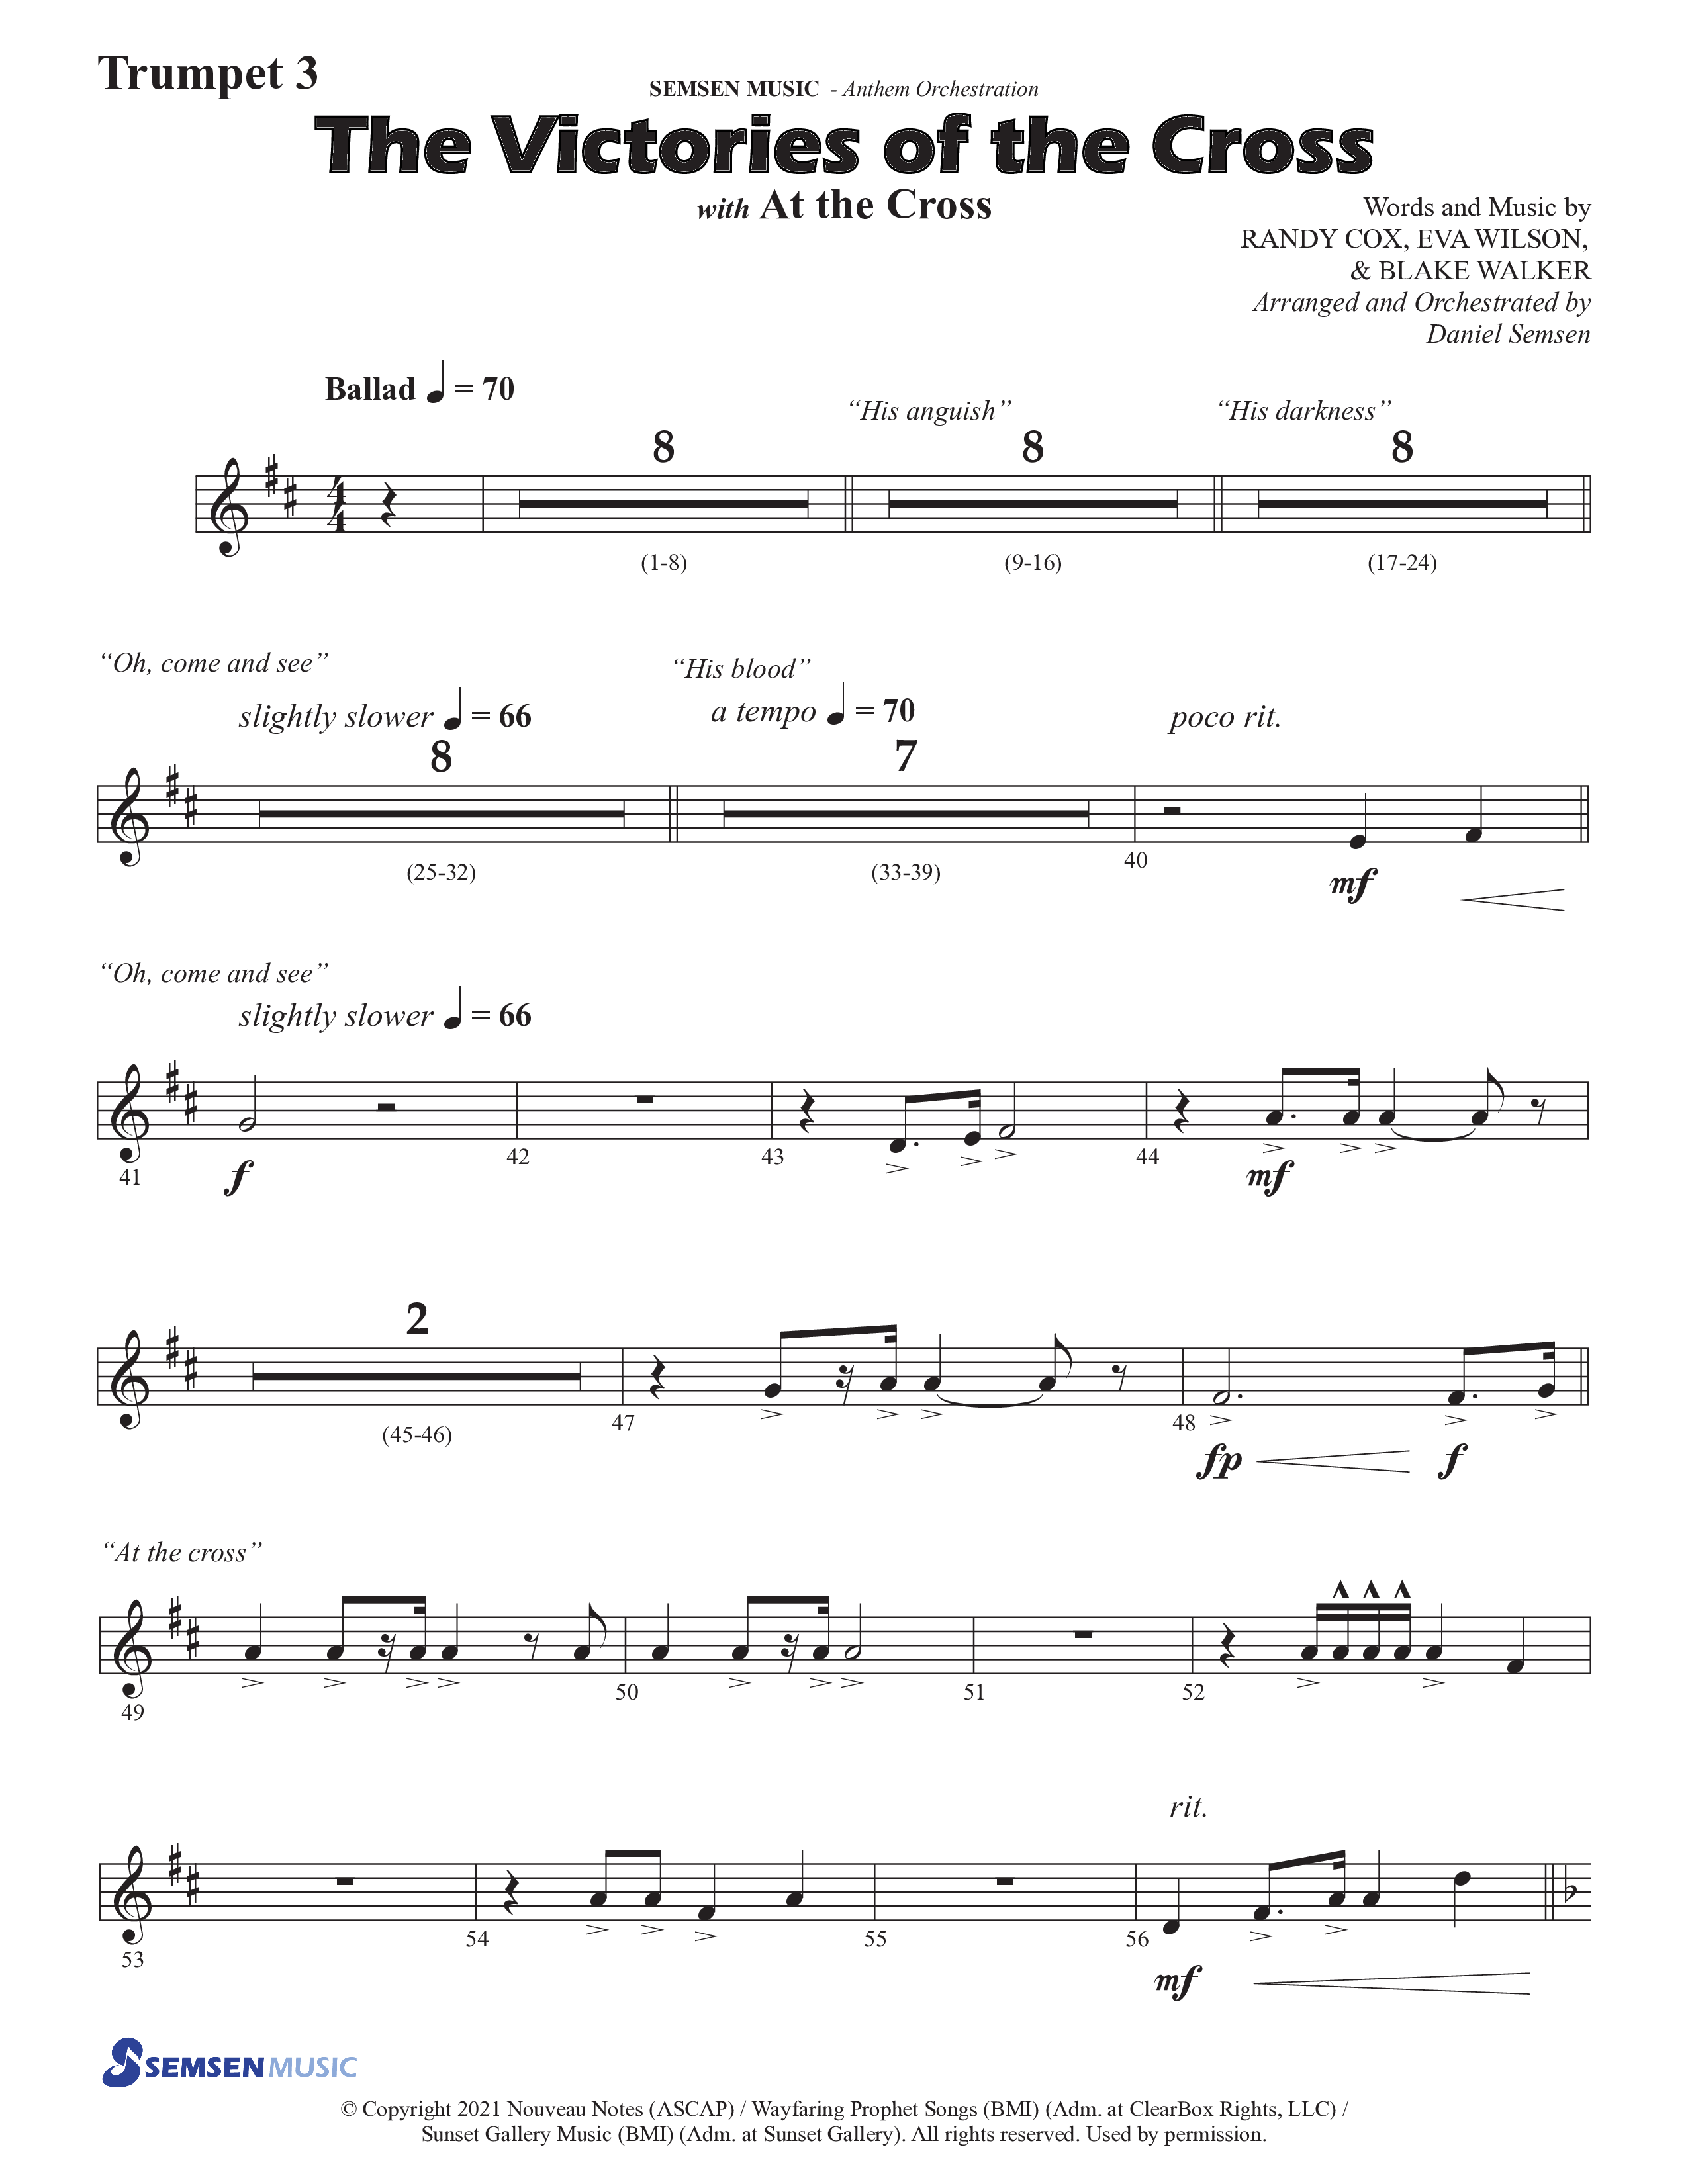 The Victories Of The Cross (with At The Cross) (Choral Anthem SATB) Trumpet 3 (Semsen Music / Arr. Daniel Semsen)